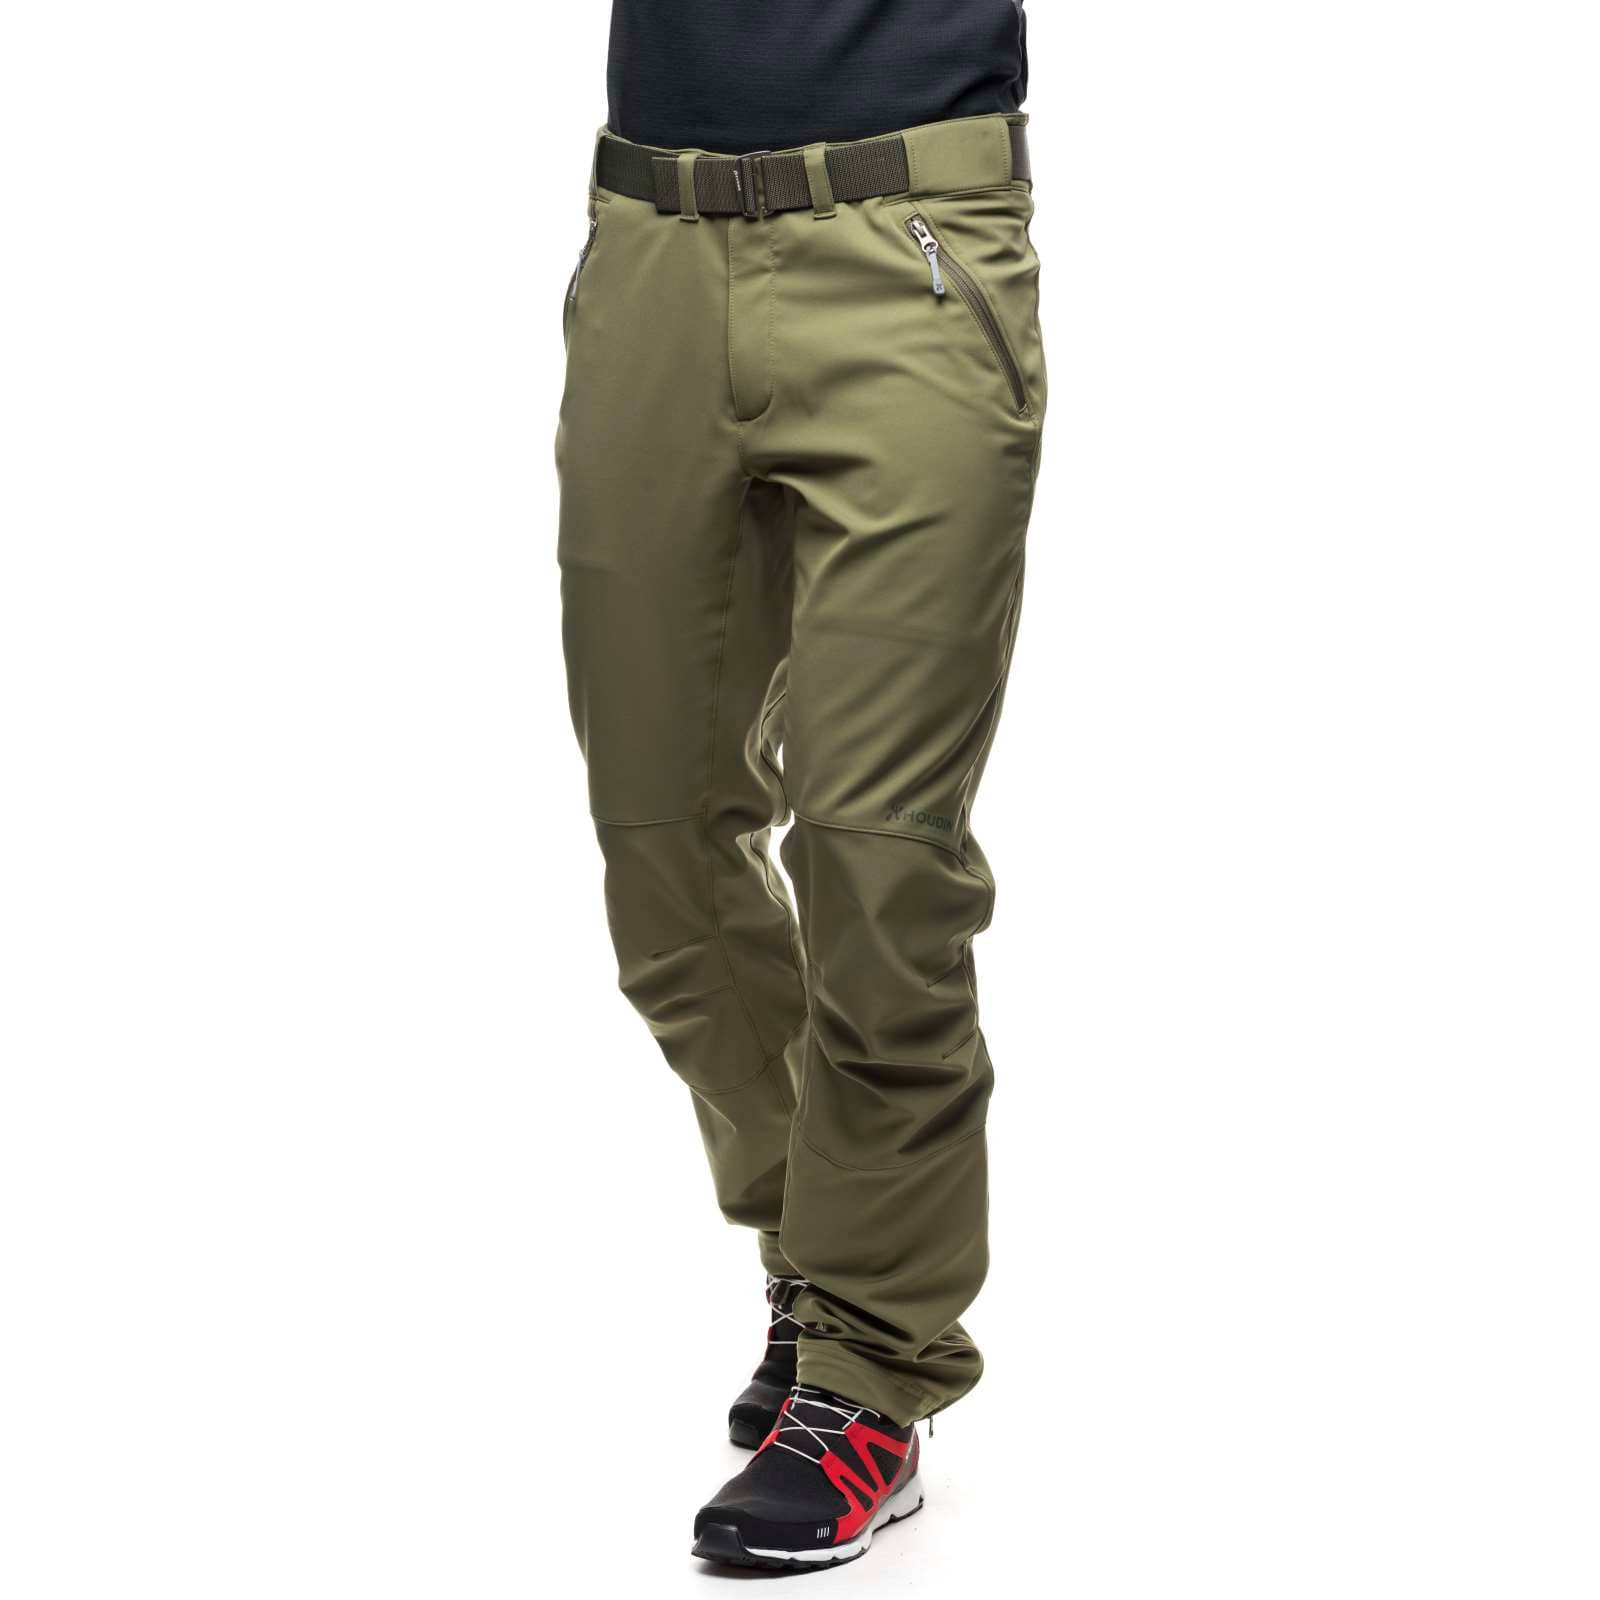 Houdini Men's Motion Pants from Outnorth